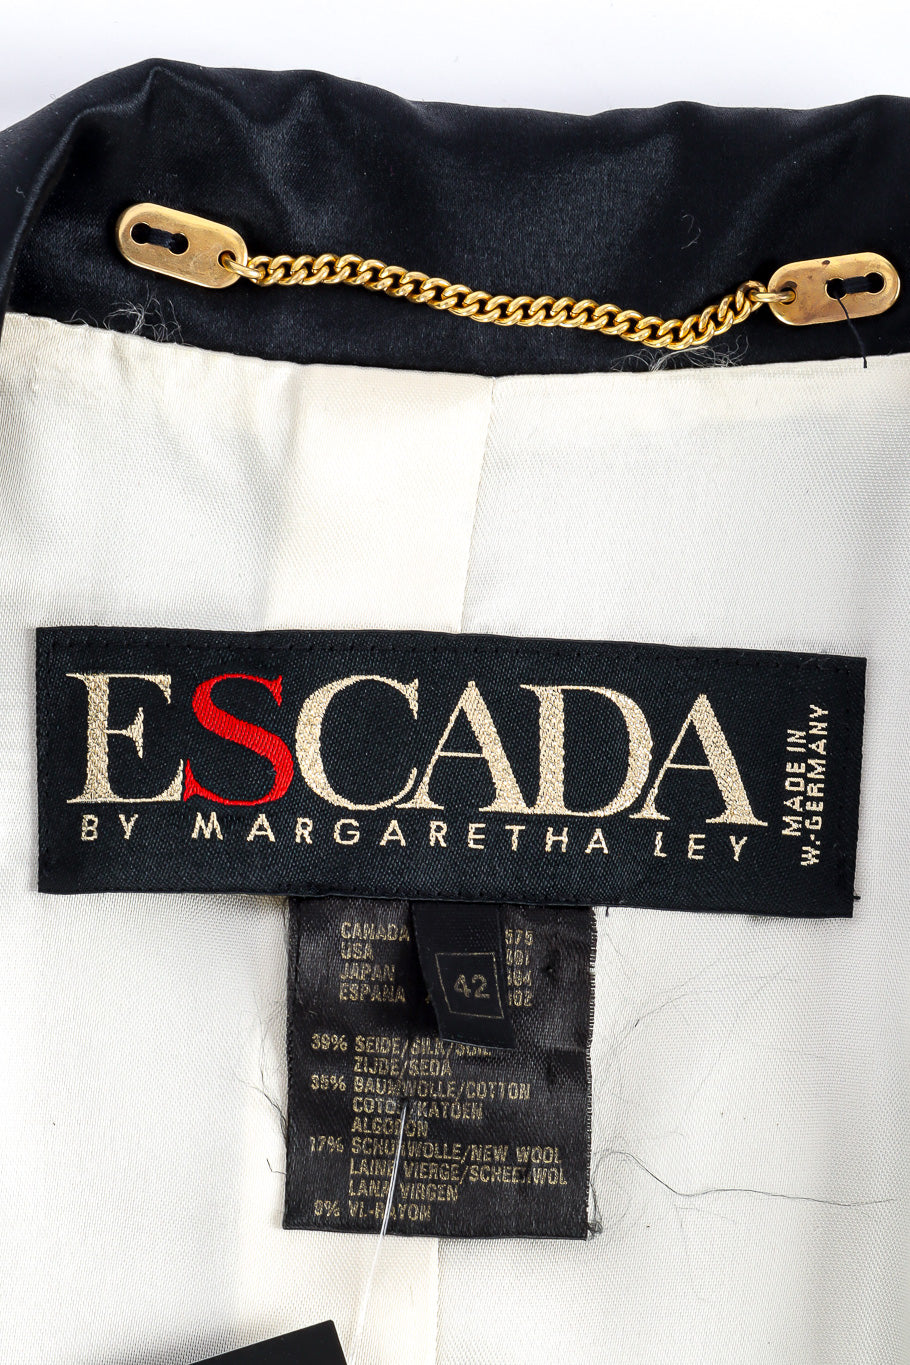 Embroidered longline blazer with contrast sleeves and wide silk lapel by Escada label and locker loop @recessla